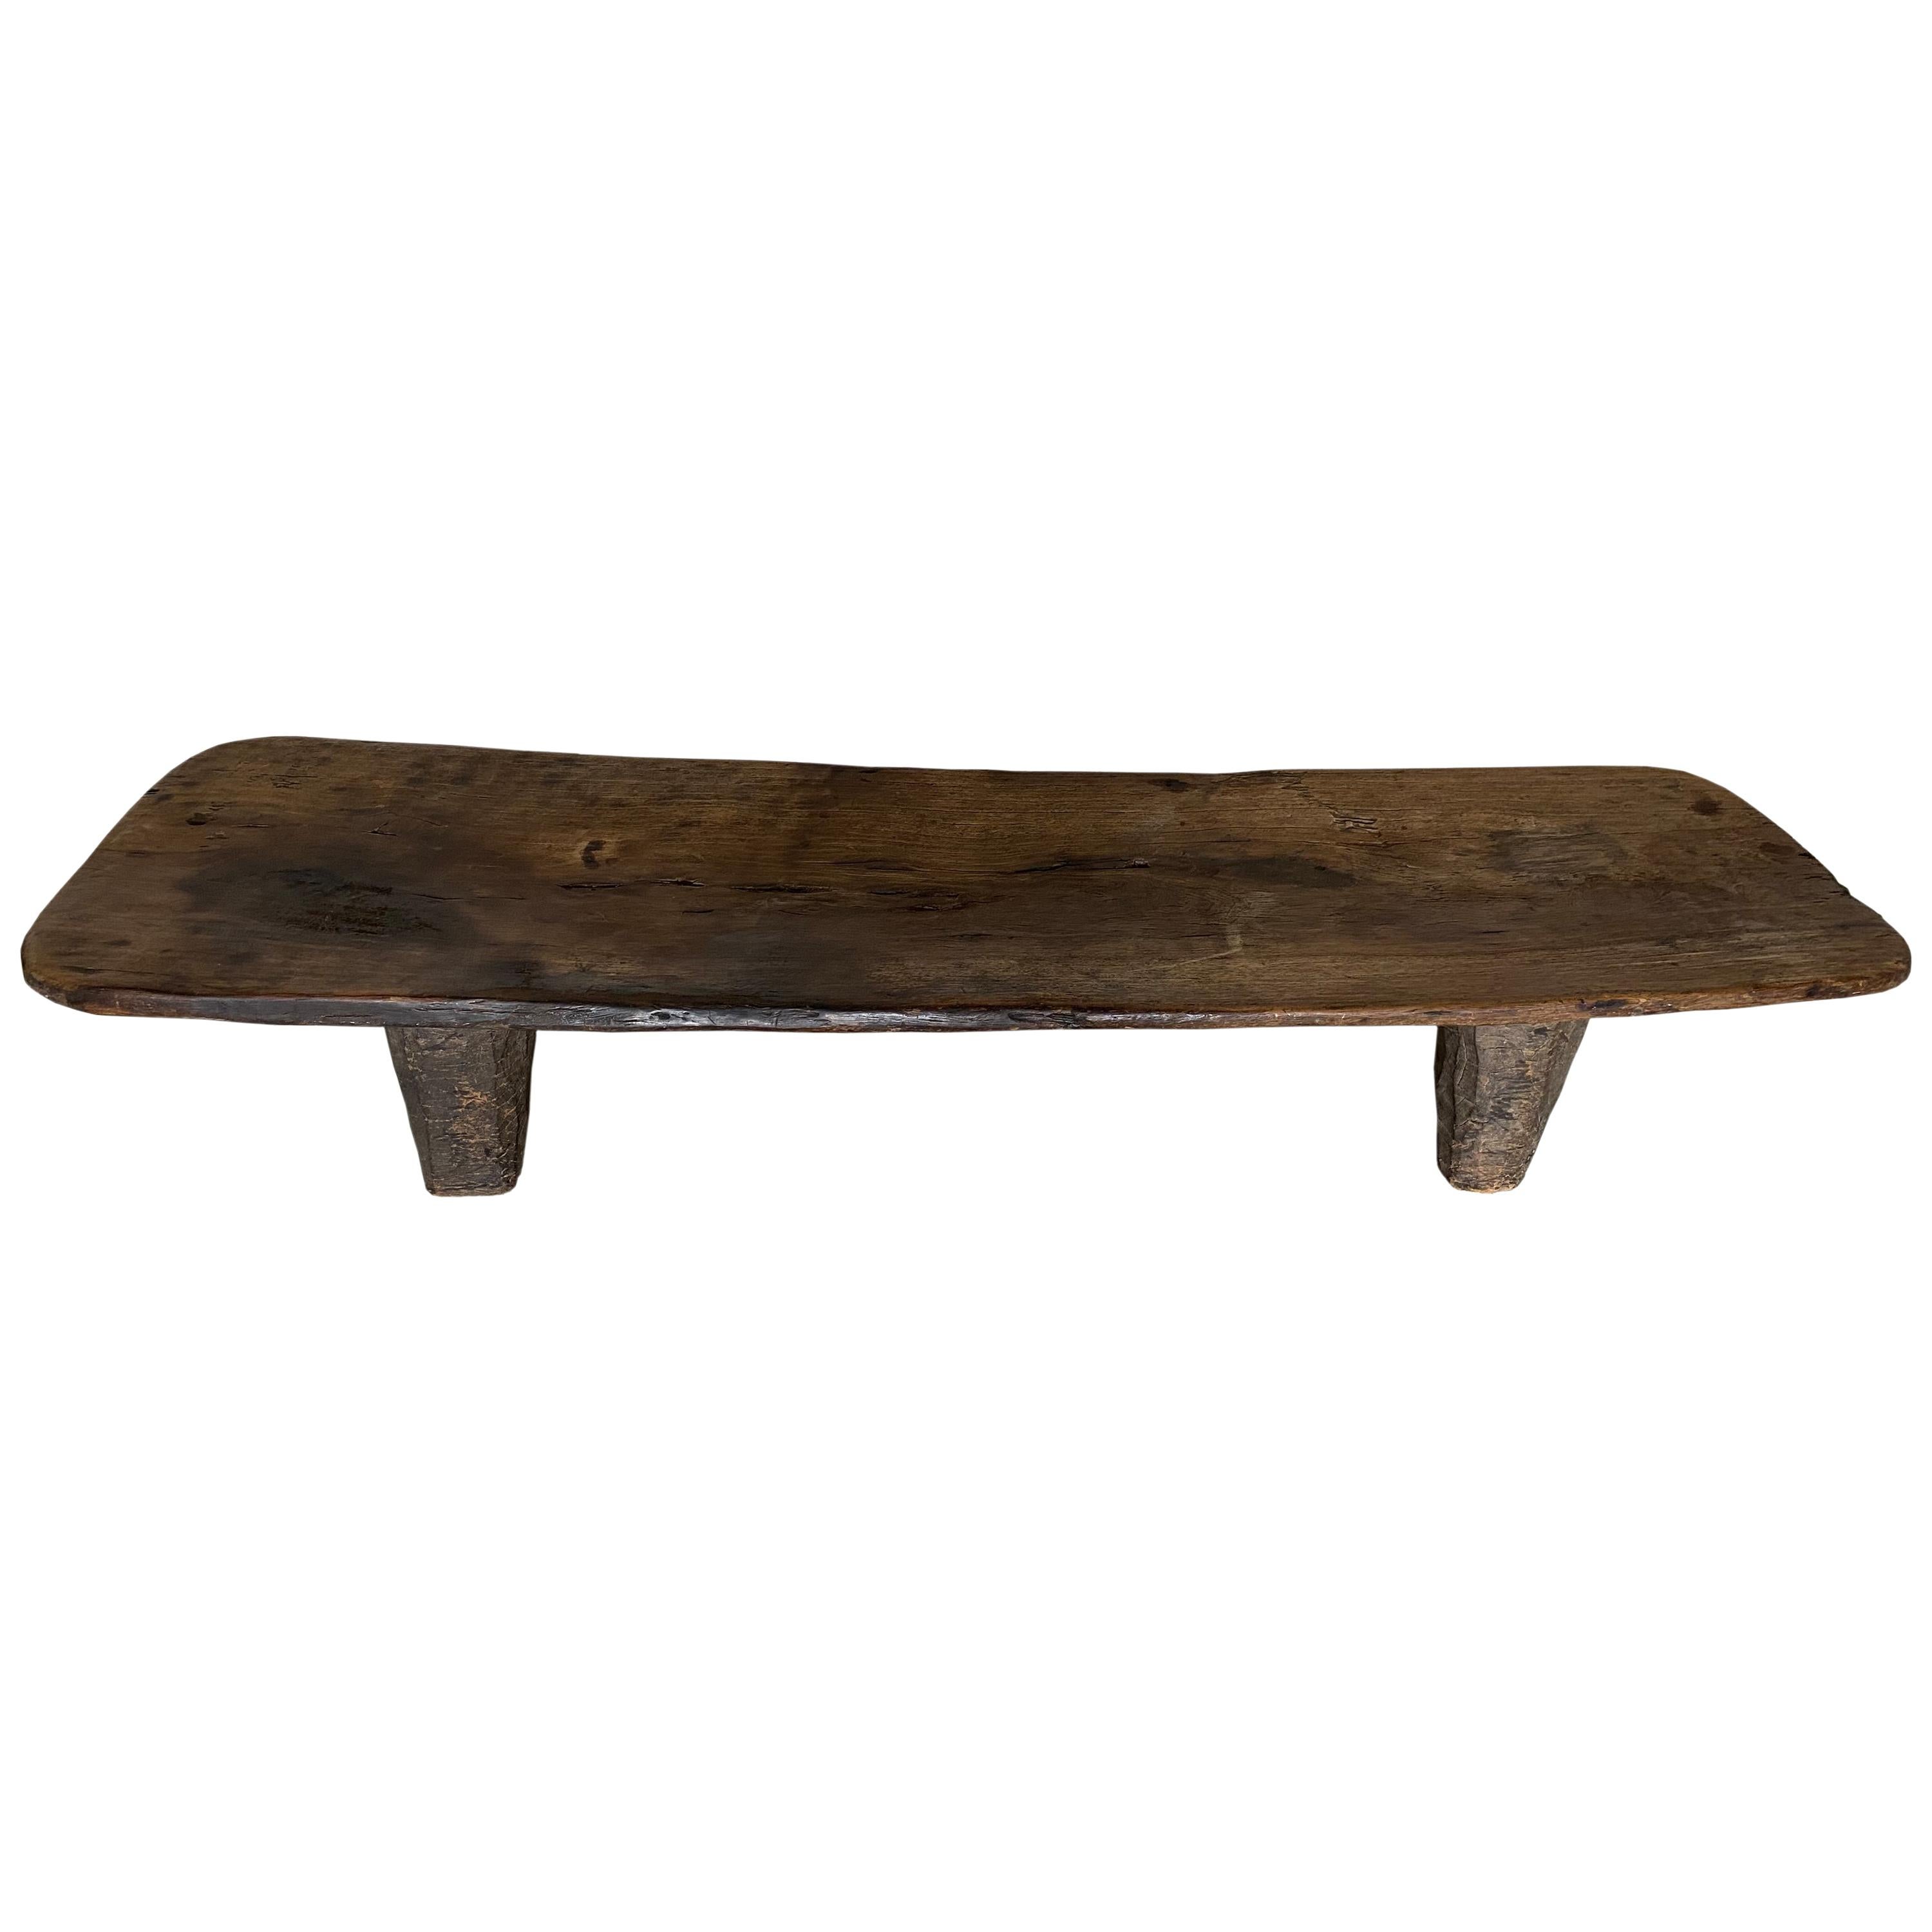 Andrianna Shamaris Antique African Bench, Coffee Table or Daybed